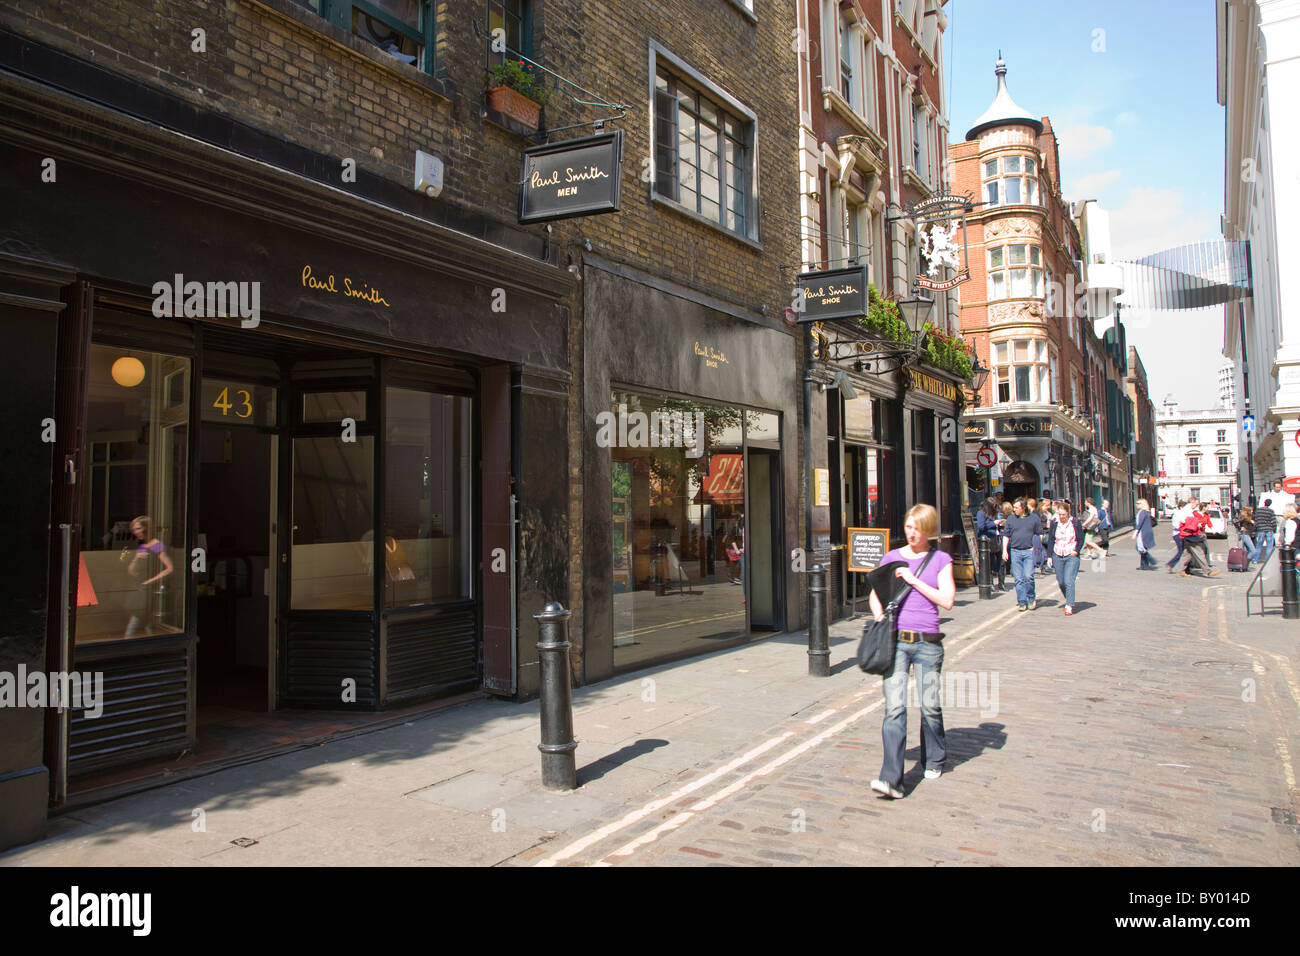 Paul Smith shop on Floral Street in Covent Garden Stock Photo